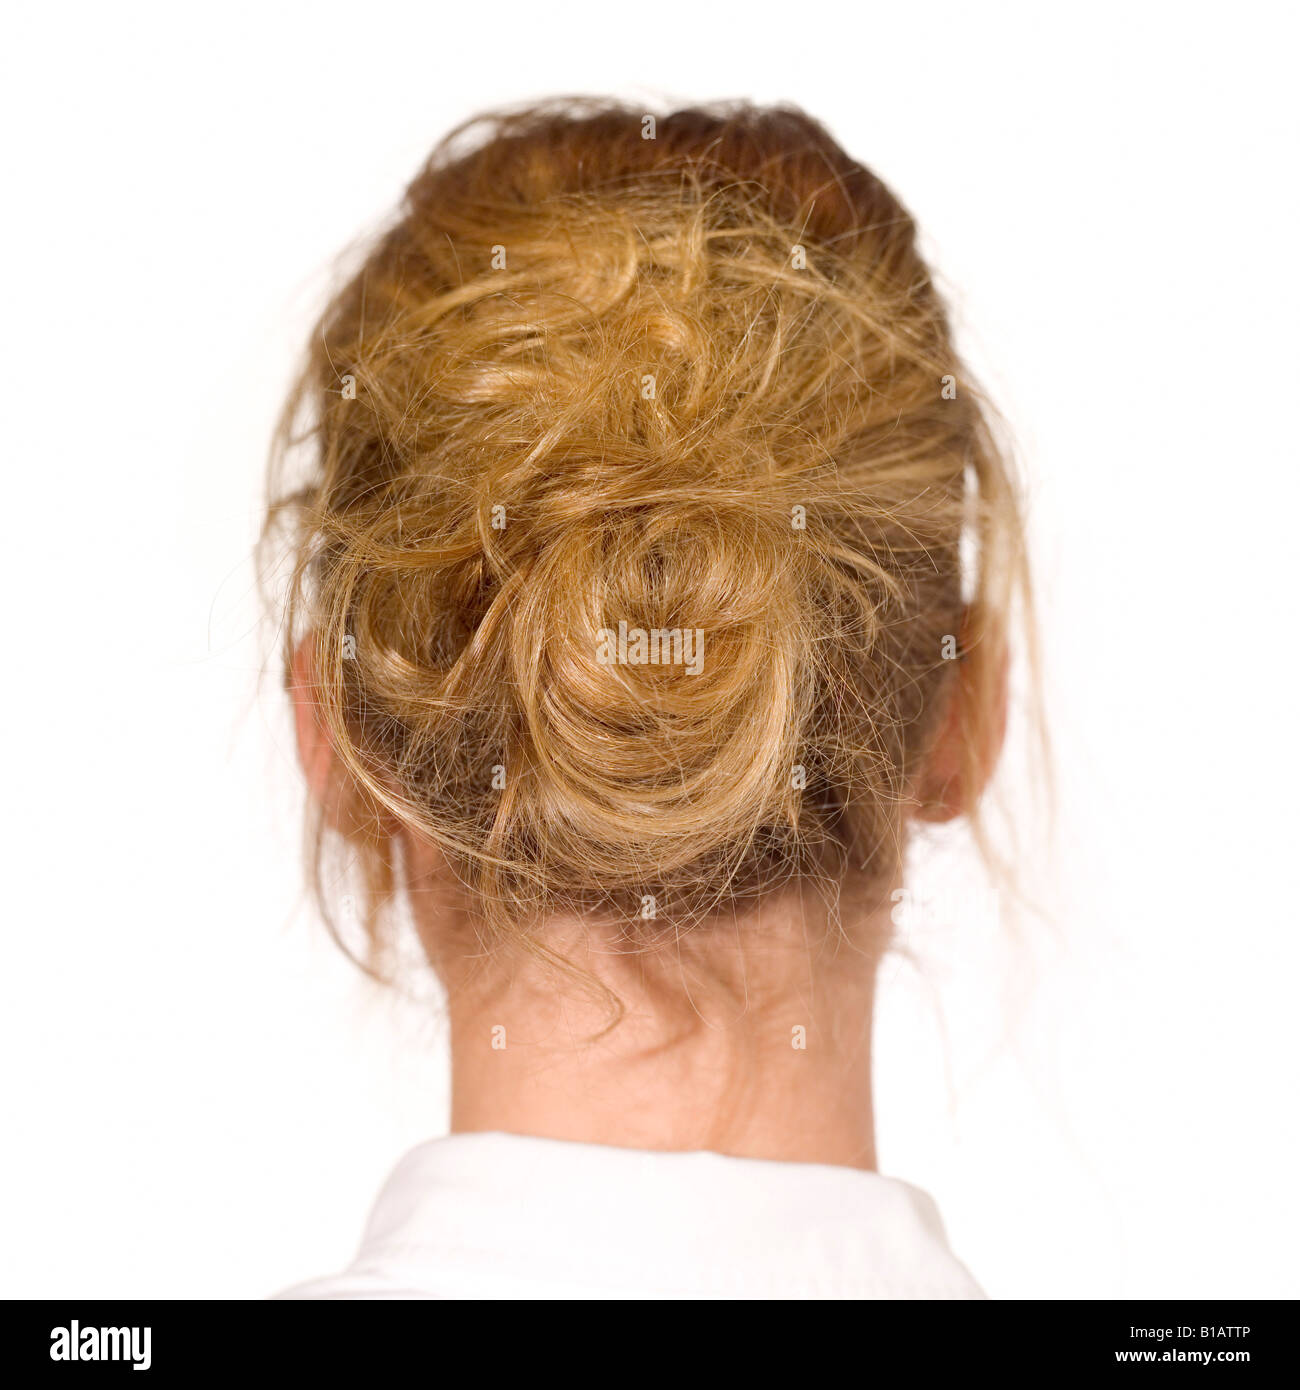 Young girl, rear view Stock Photo